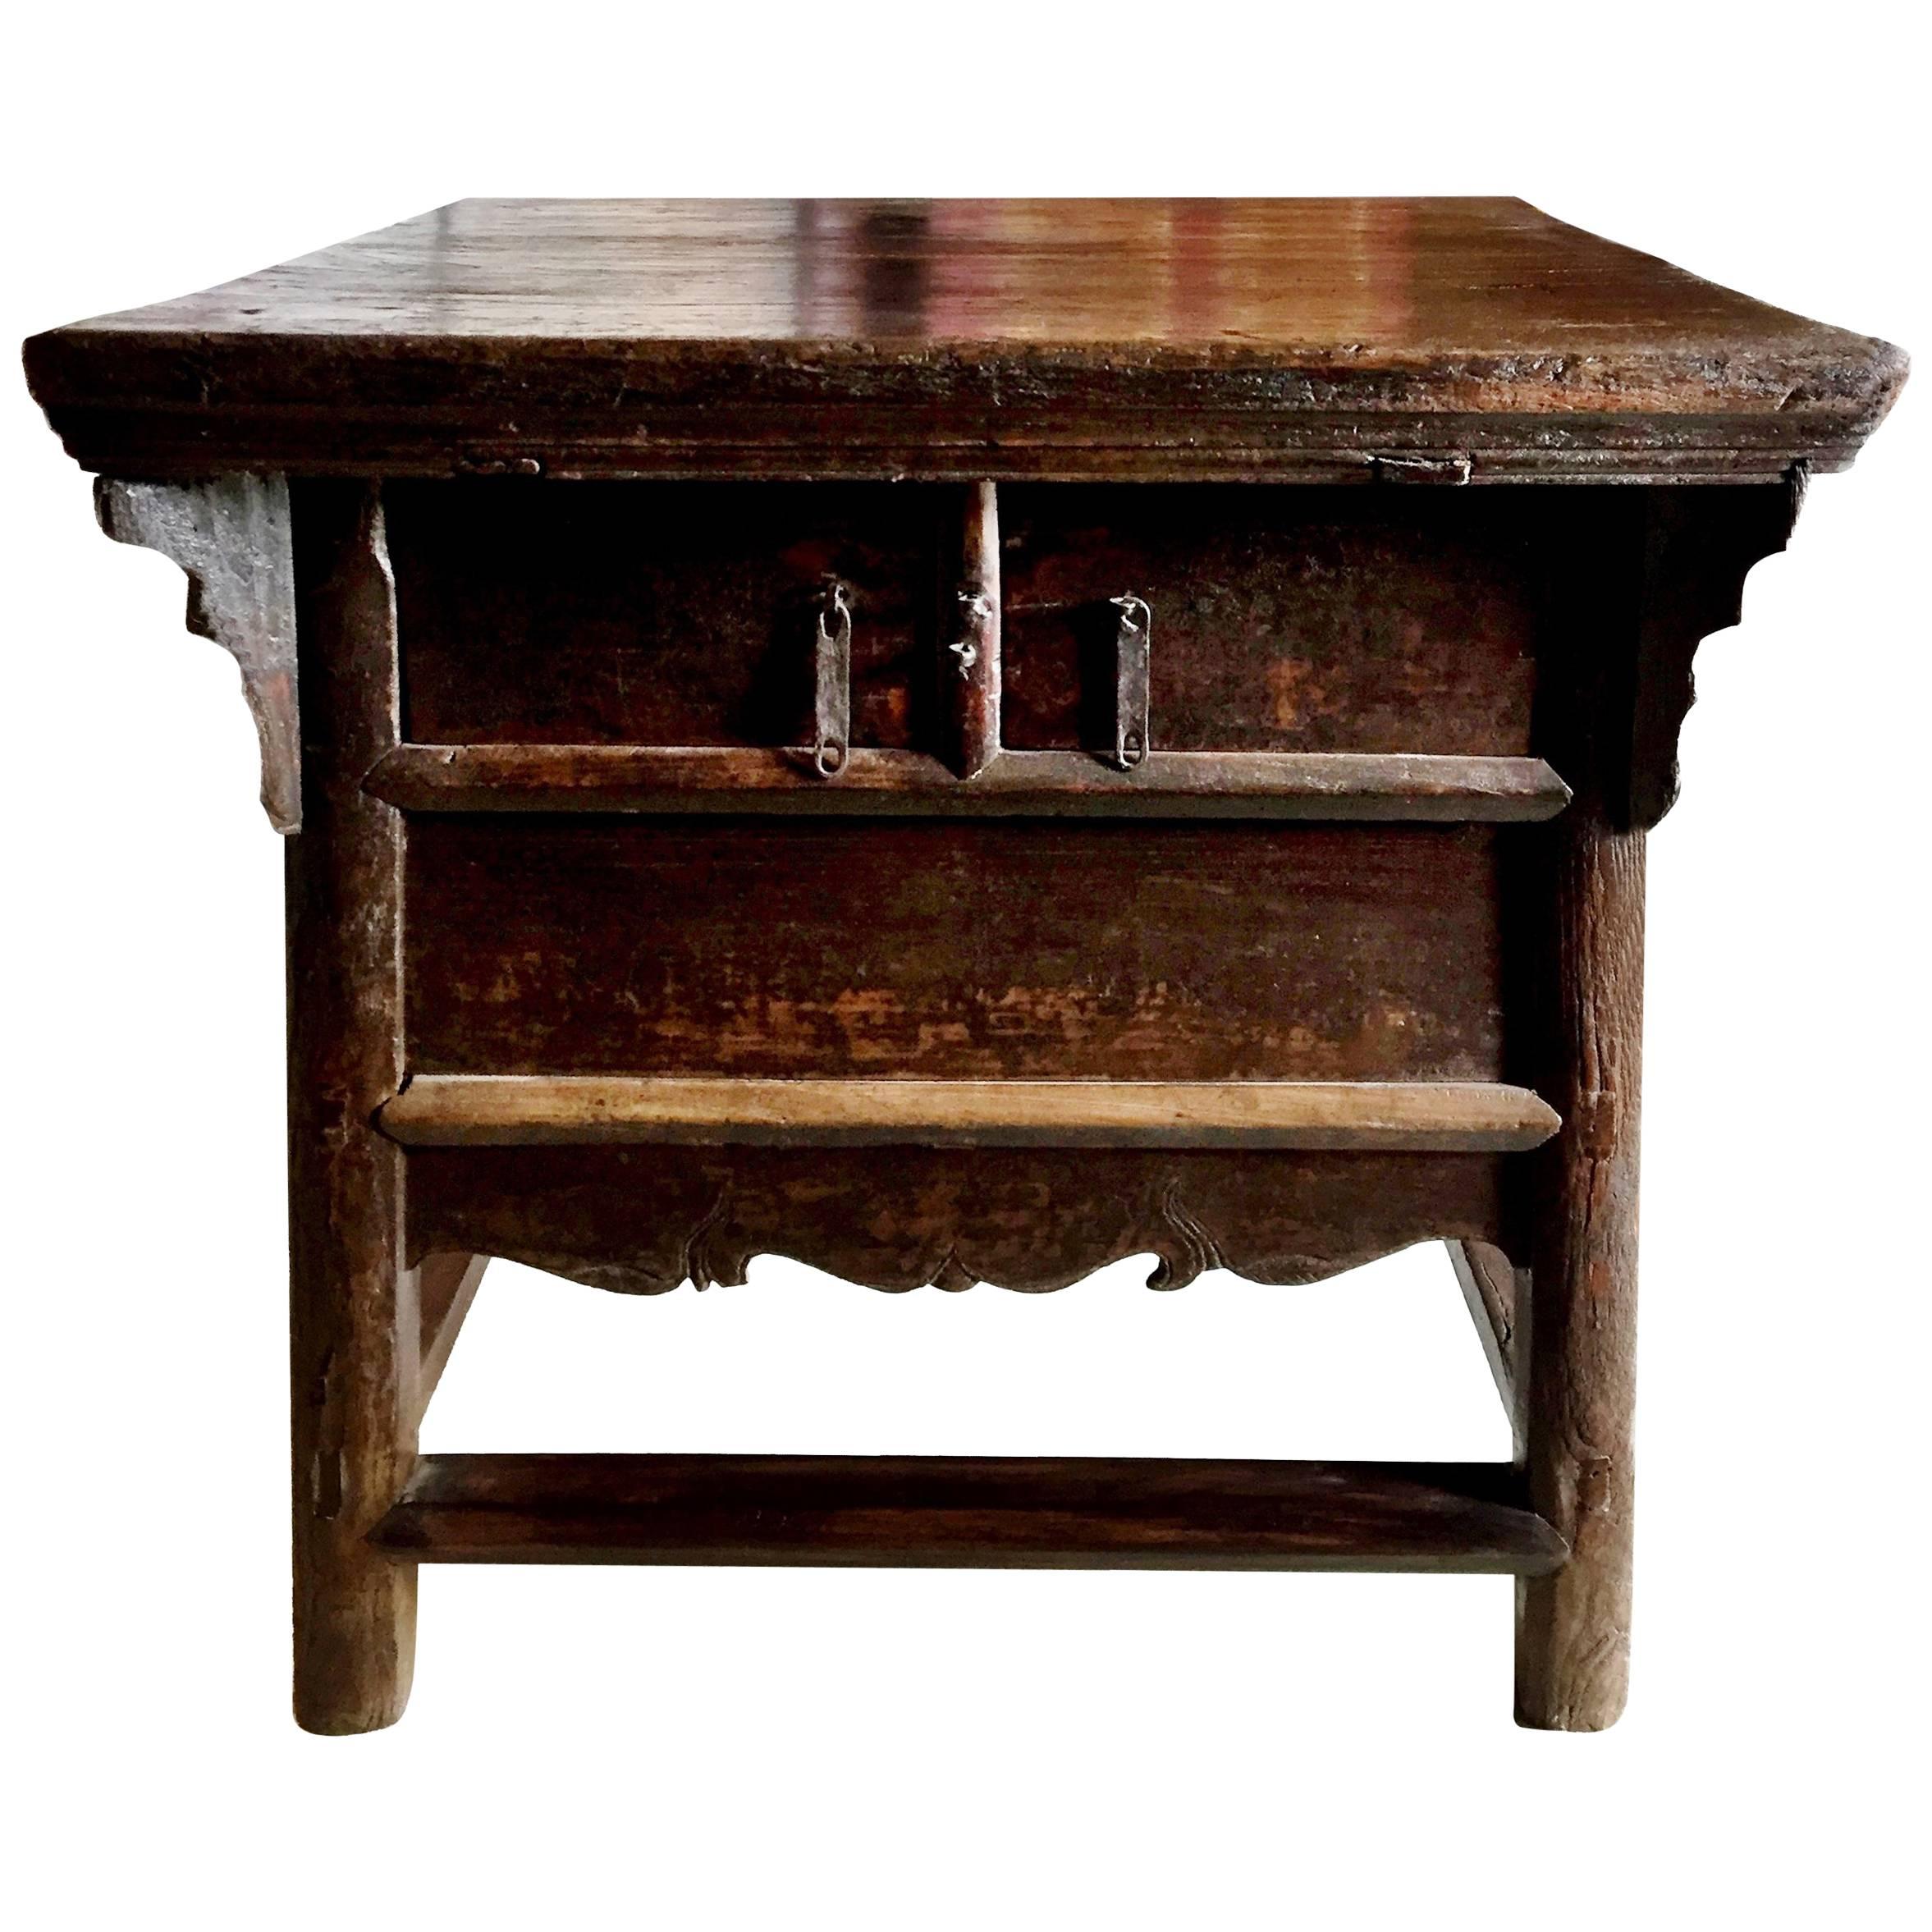 Antique Farm Table, Rustic Chinese Old Farm Table